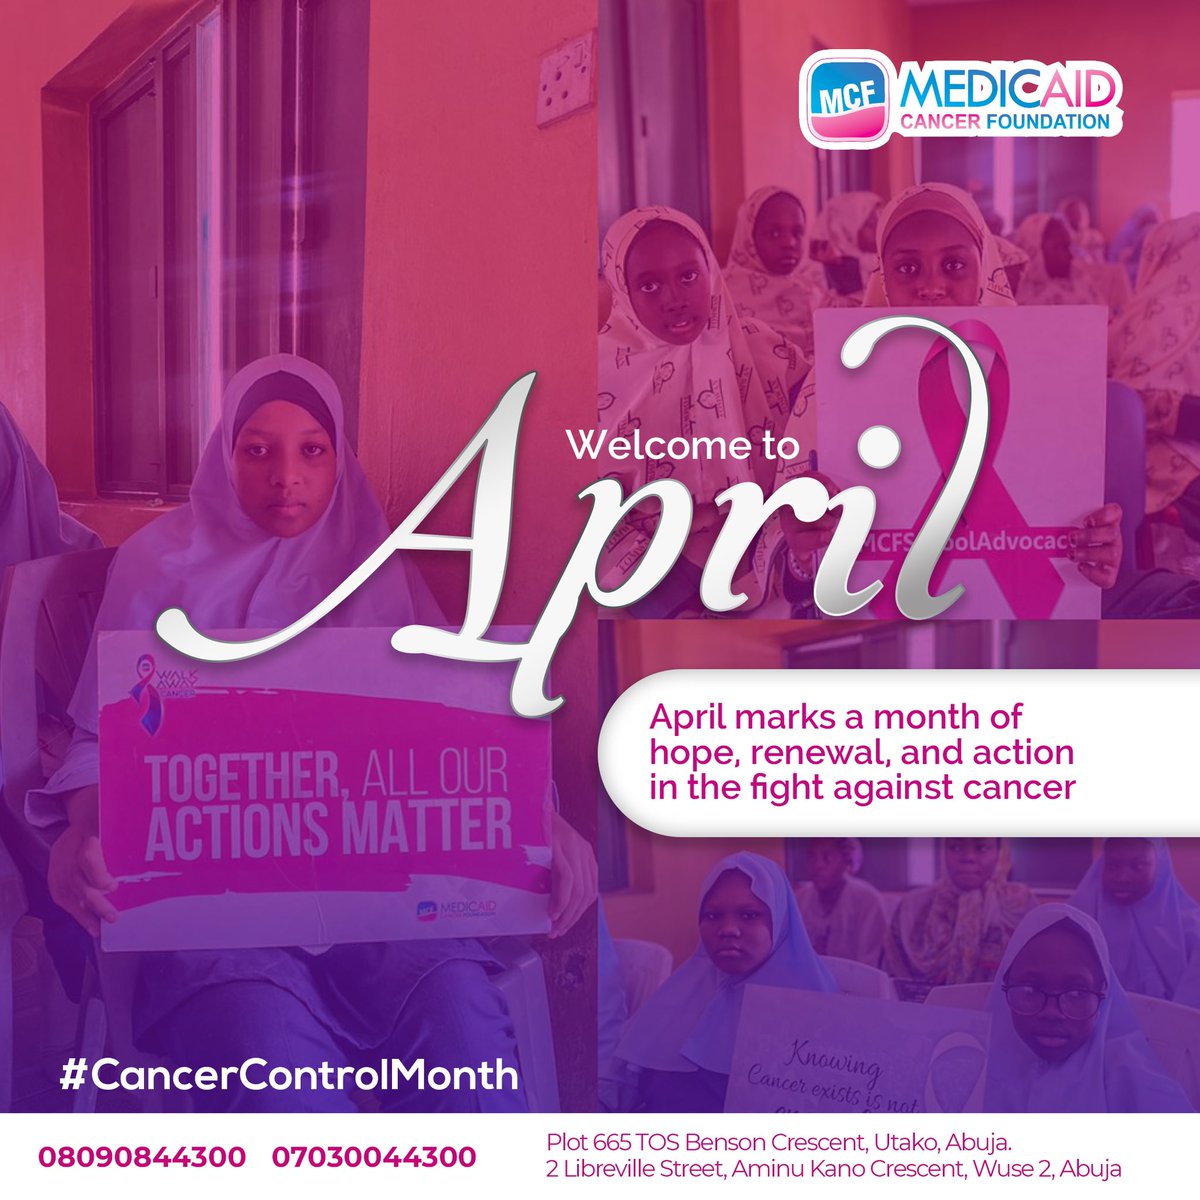 April marks a month of hope, renewal, and action in the fight against cancer. 🌸 

Join us as we shine a light on awareness, support, and progress this #CancerControlMonth. 

Together, we're stronger than cancer. Let's make every day count towards a brighter, healthier future. 💛…